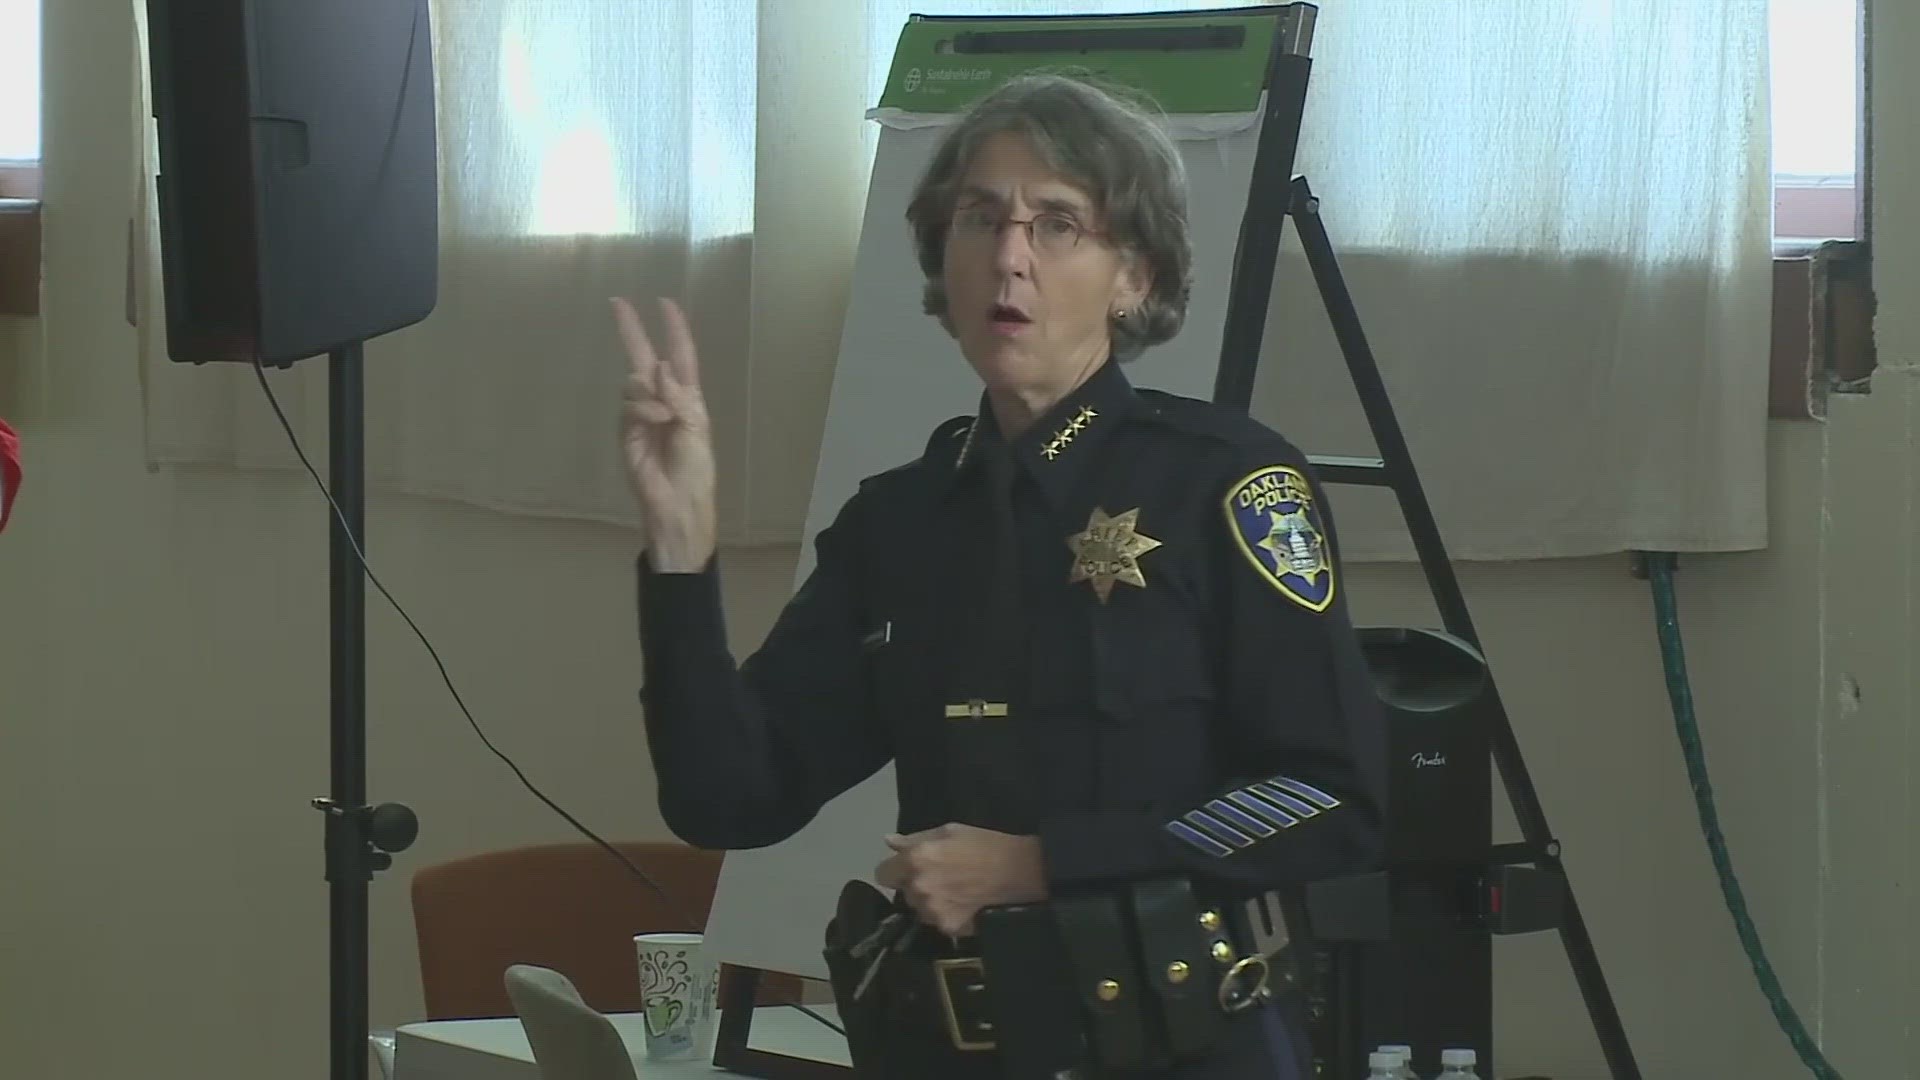 Former leader of police departments in California and Washington, Anne Kirkpatrick, has been selected as NOPD superintendent, which city council must now approve.